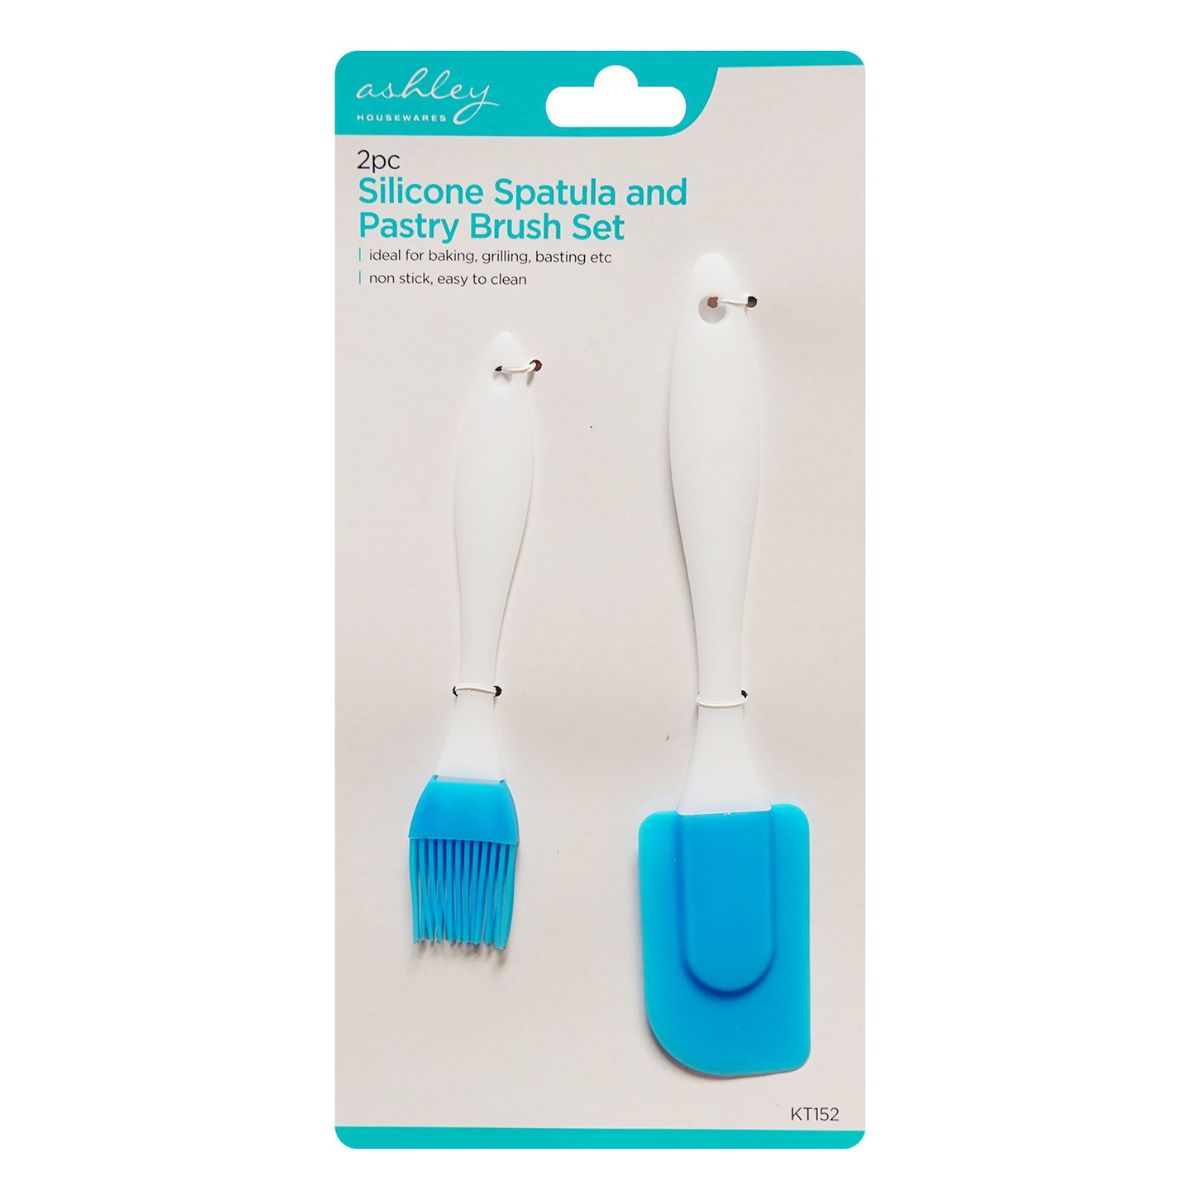 An Ashley - Housewares Silicone Spatula and Pastry Brush Set packaged for sale.